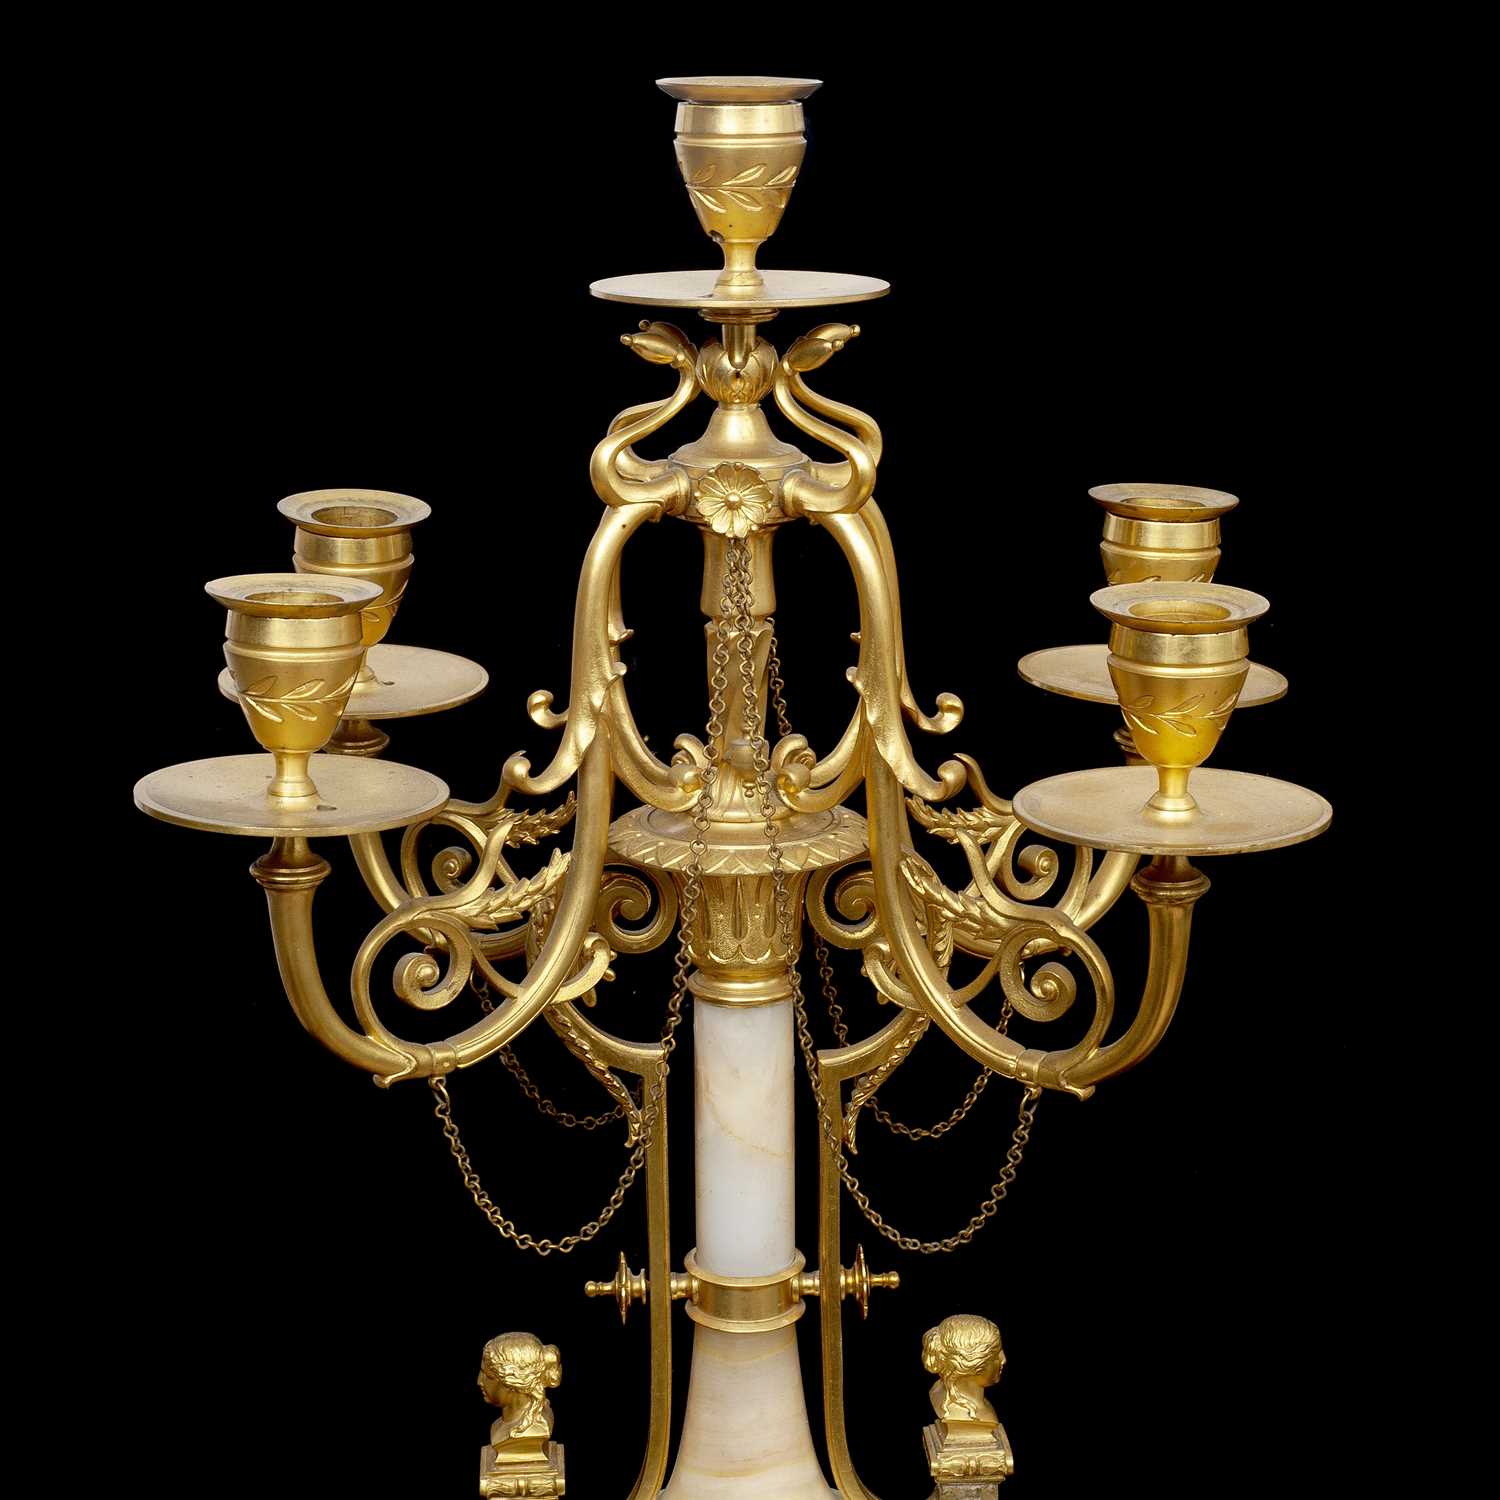 A FINE PAIR OF LATE 19TH CENTURY FRENCH GILT BRONZE AND ALGERIAN ONYX CANDELABRA - Image 3 of 4